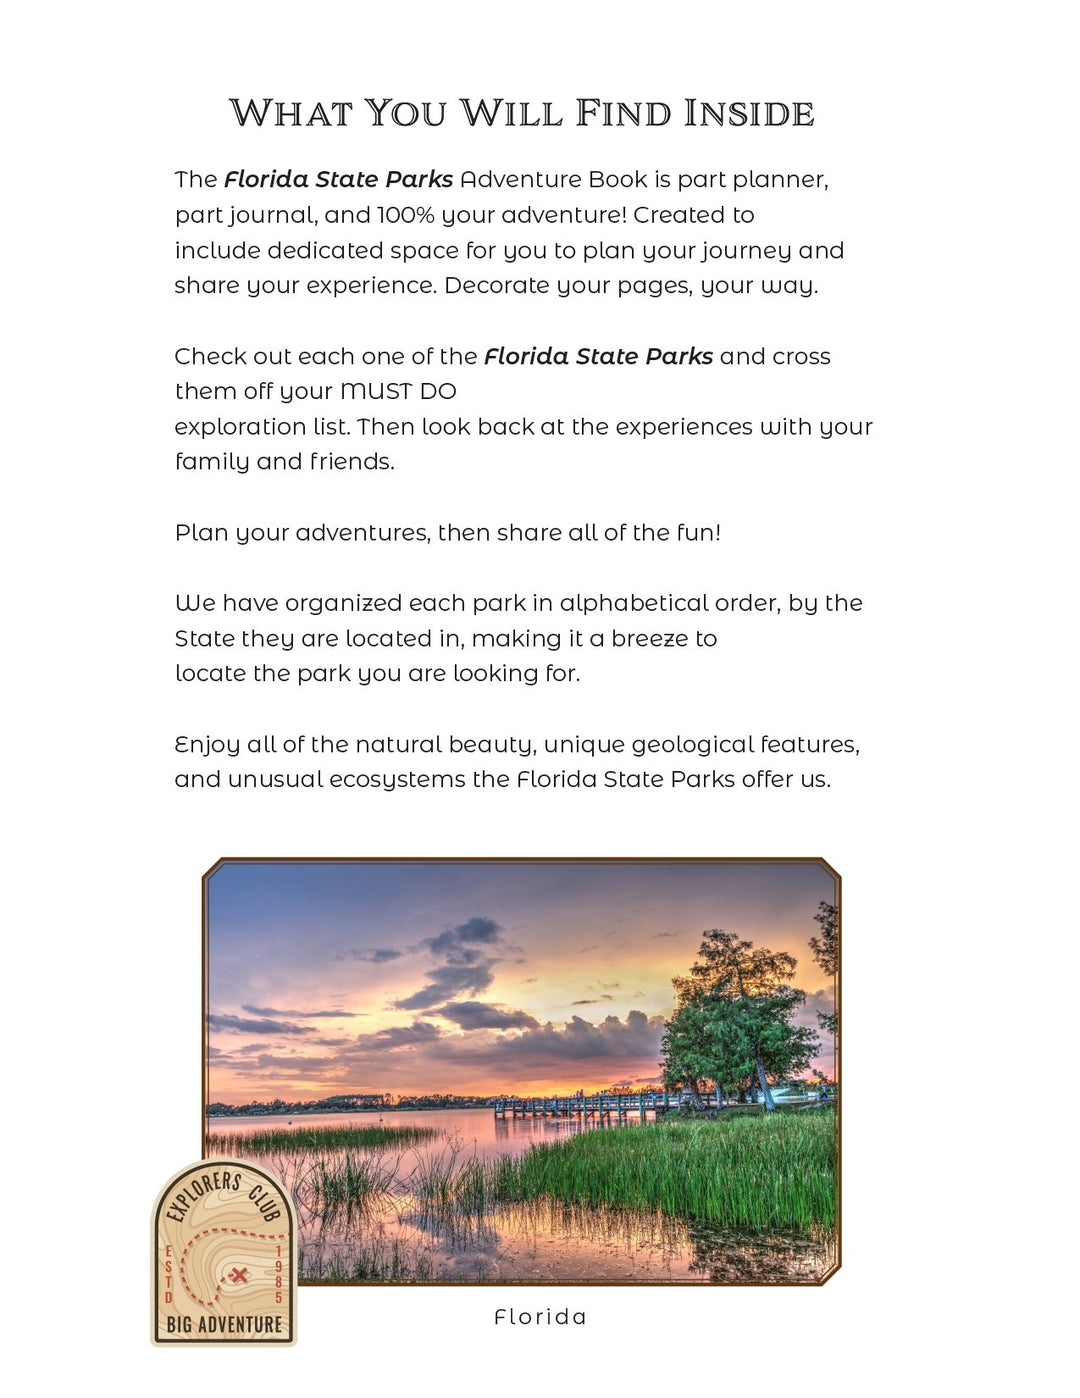 Florida State Parks & Sites - Adventure Planning Journal - My Nature Book Adventures